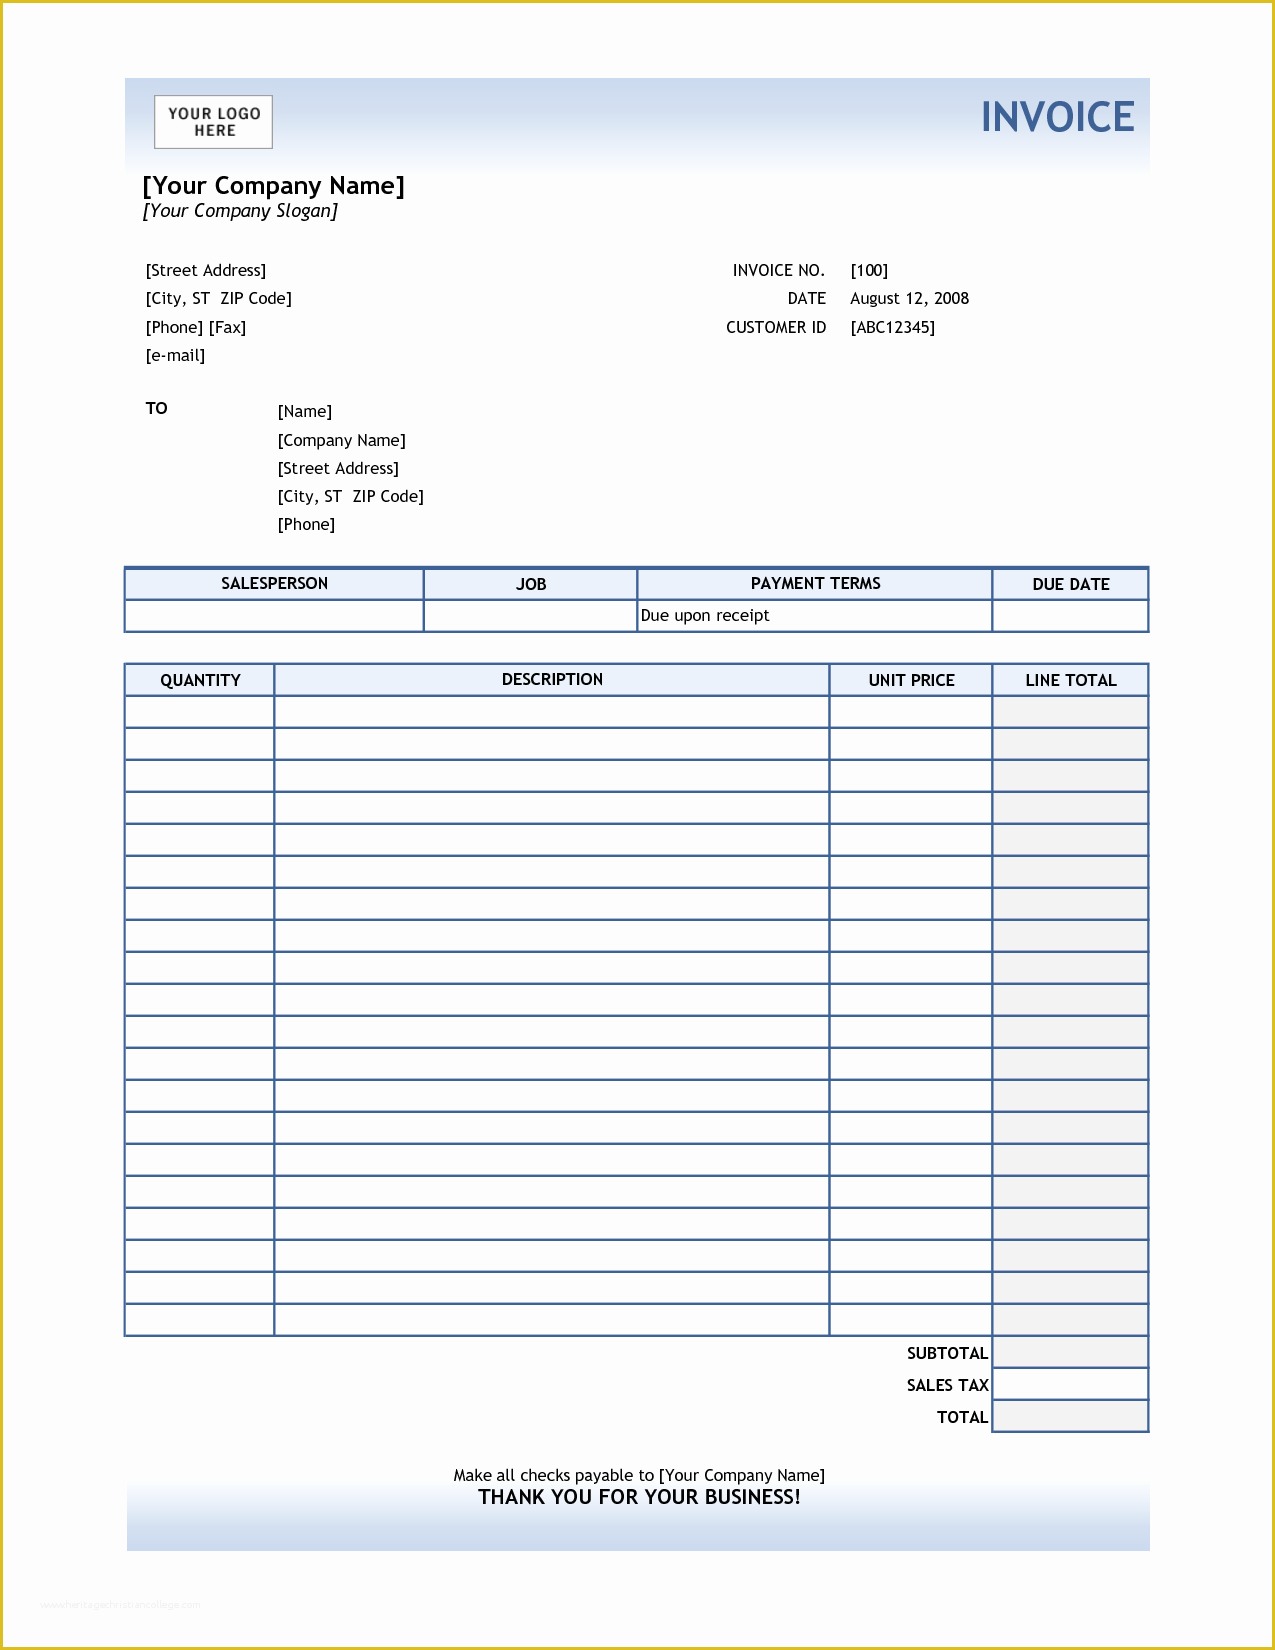 Microsoft Works Invoice Template Free Download Of Sample Invoice Template Excel